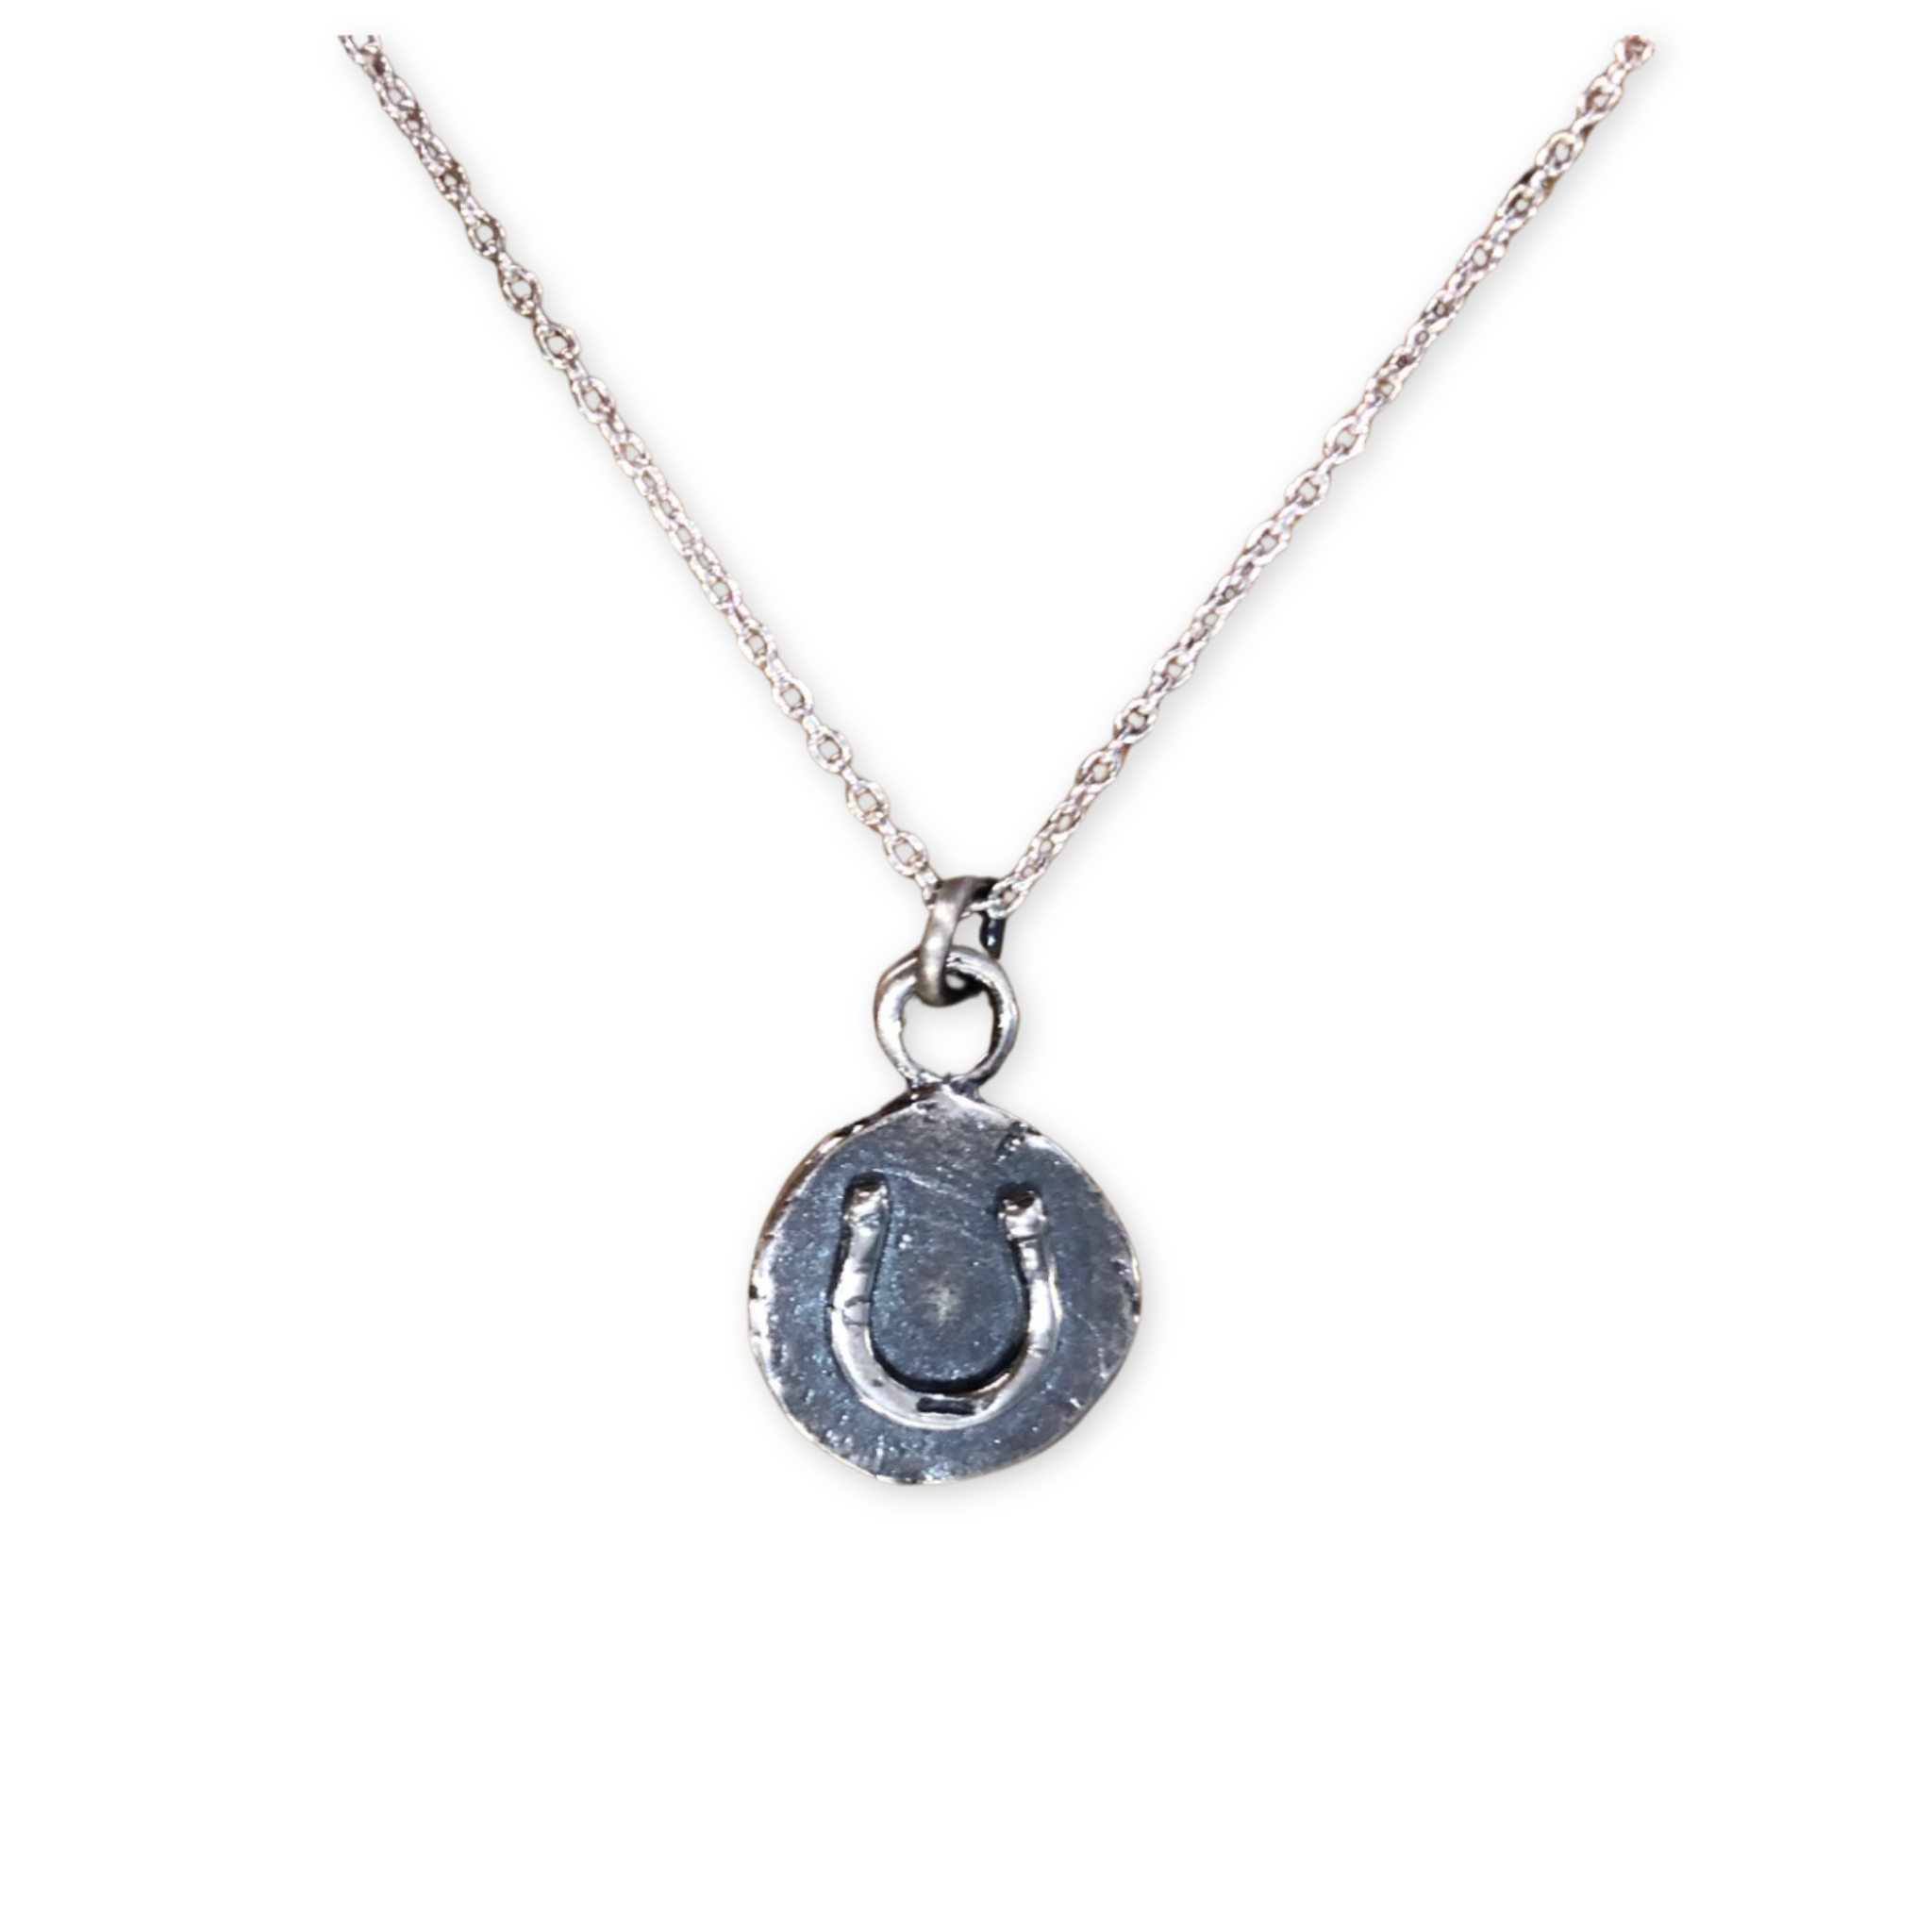 silver necklace with a round pendant with a stamped horseshoe